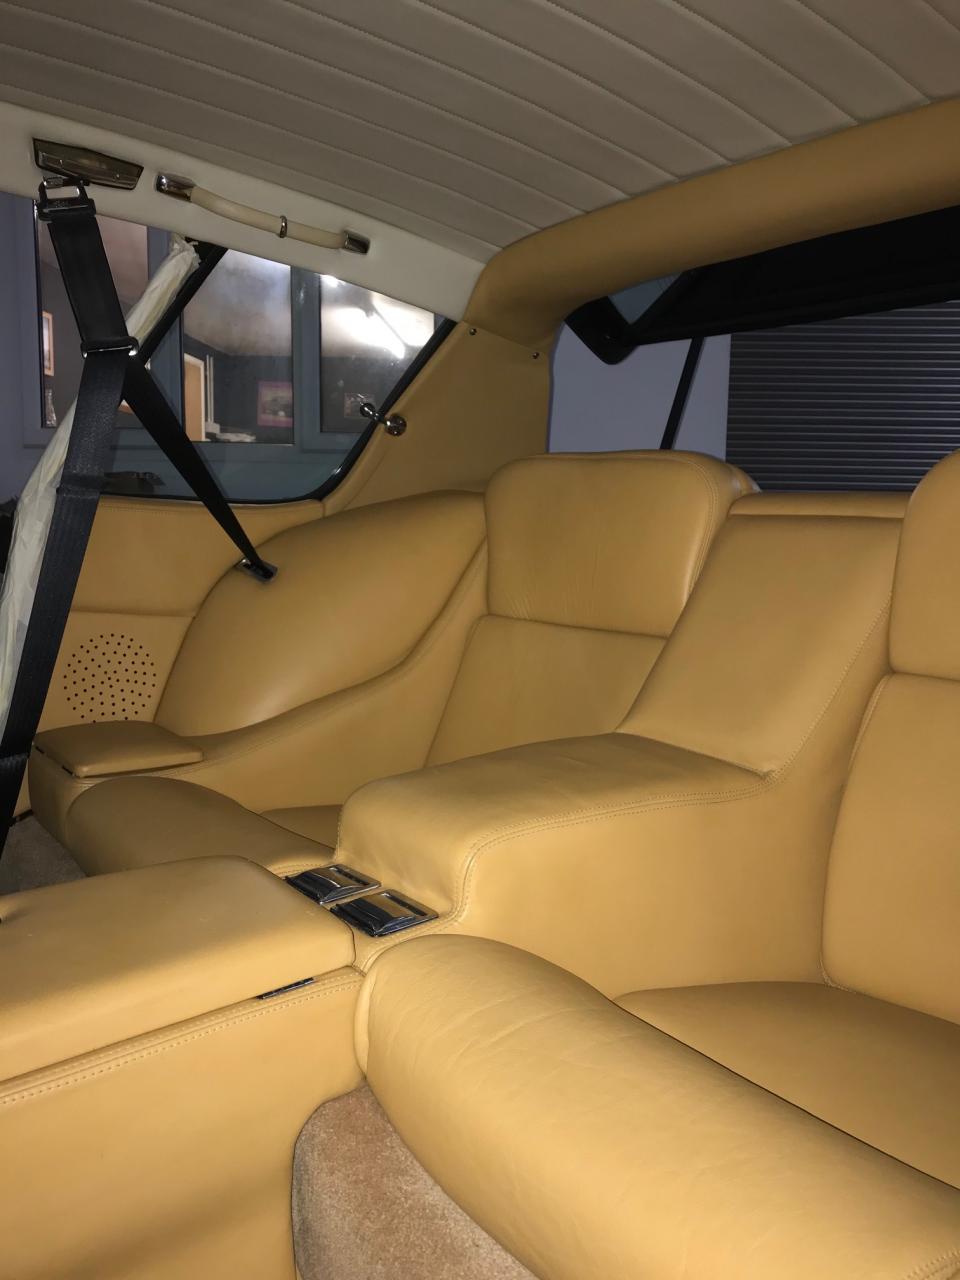 Retrimmed rear hoop and C pillars in tan leather to match recent interior which we are refitting as it was in excellent condition, new carpets in Jensen shade, new seat belts courtesy of Rejen